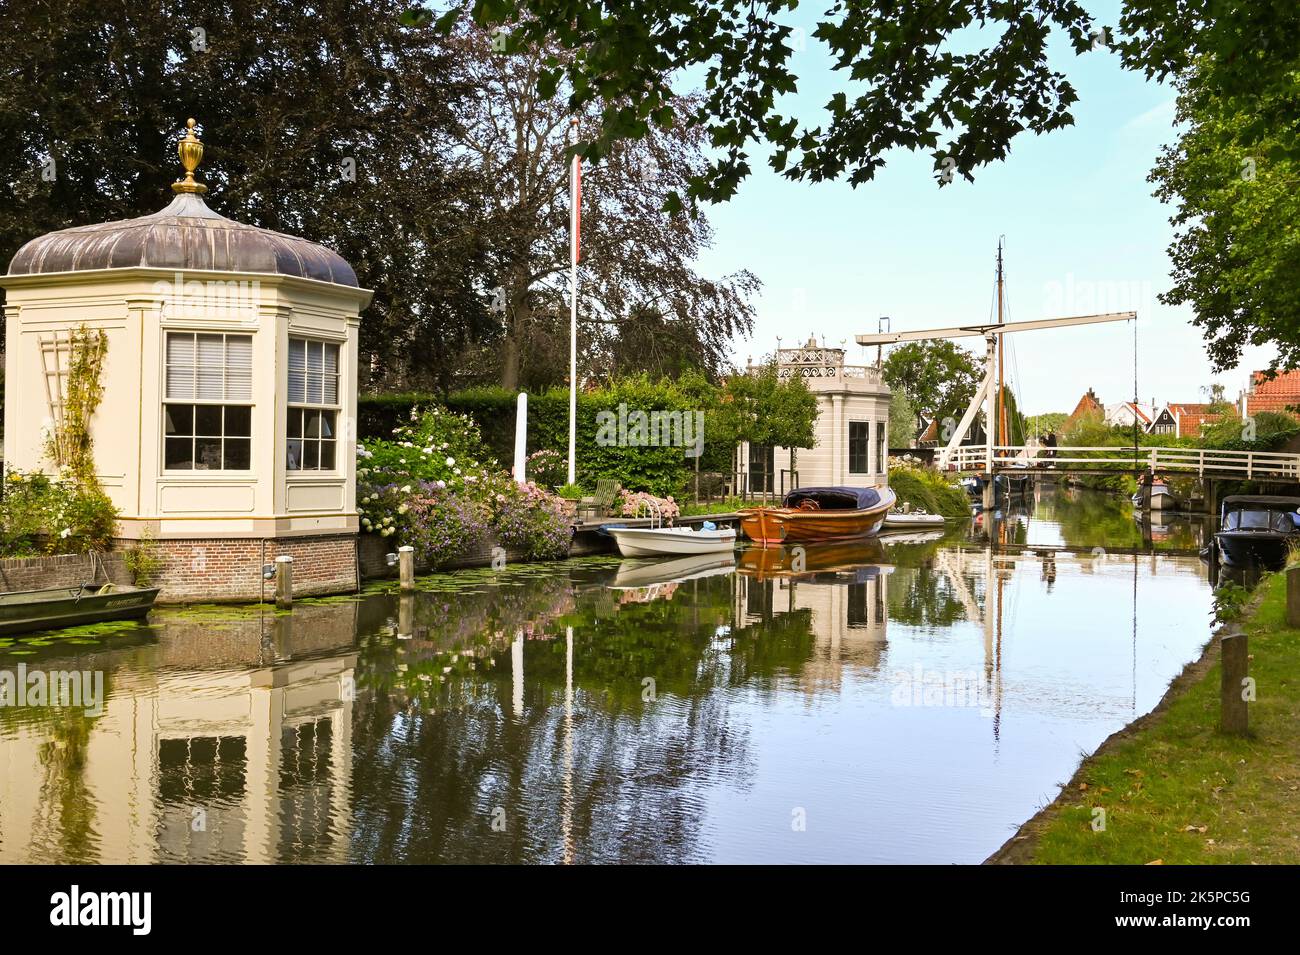 Zaandam, Netherlands - August 2022: Summer houses and gardens alongside one of the canals in the Dutch town of Edam, which is famous for its cheese. Stock Photo